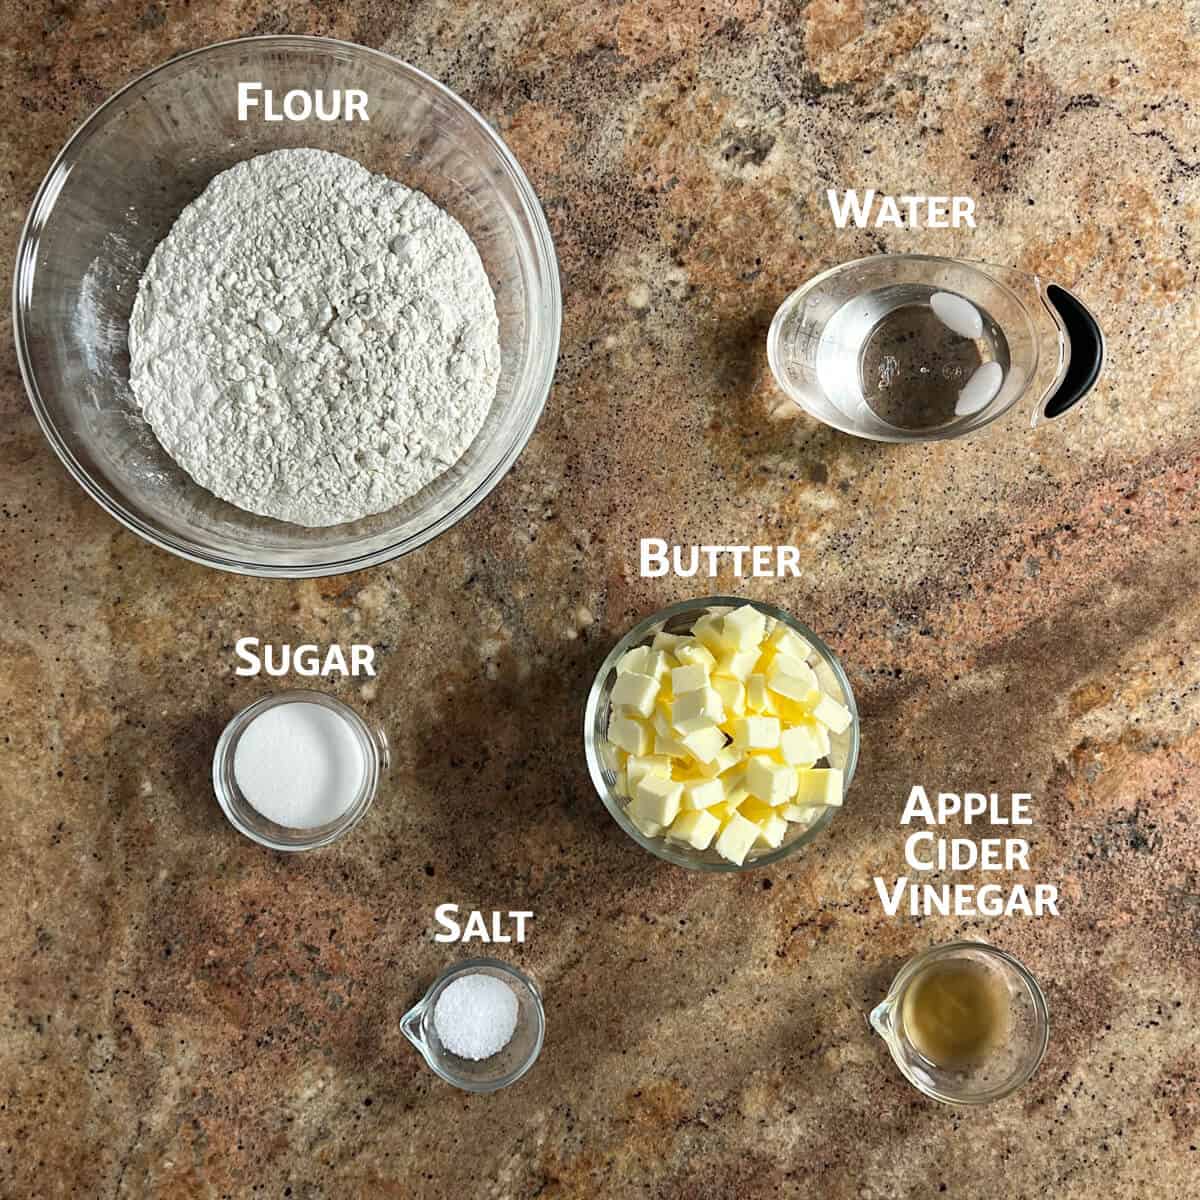 Ingredients for pie crust portioned into glass bowls.